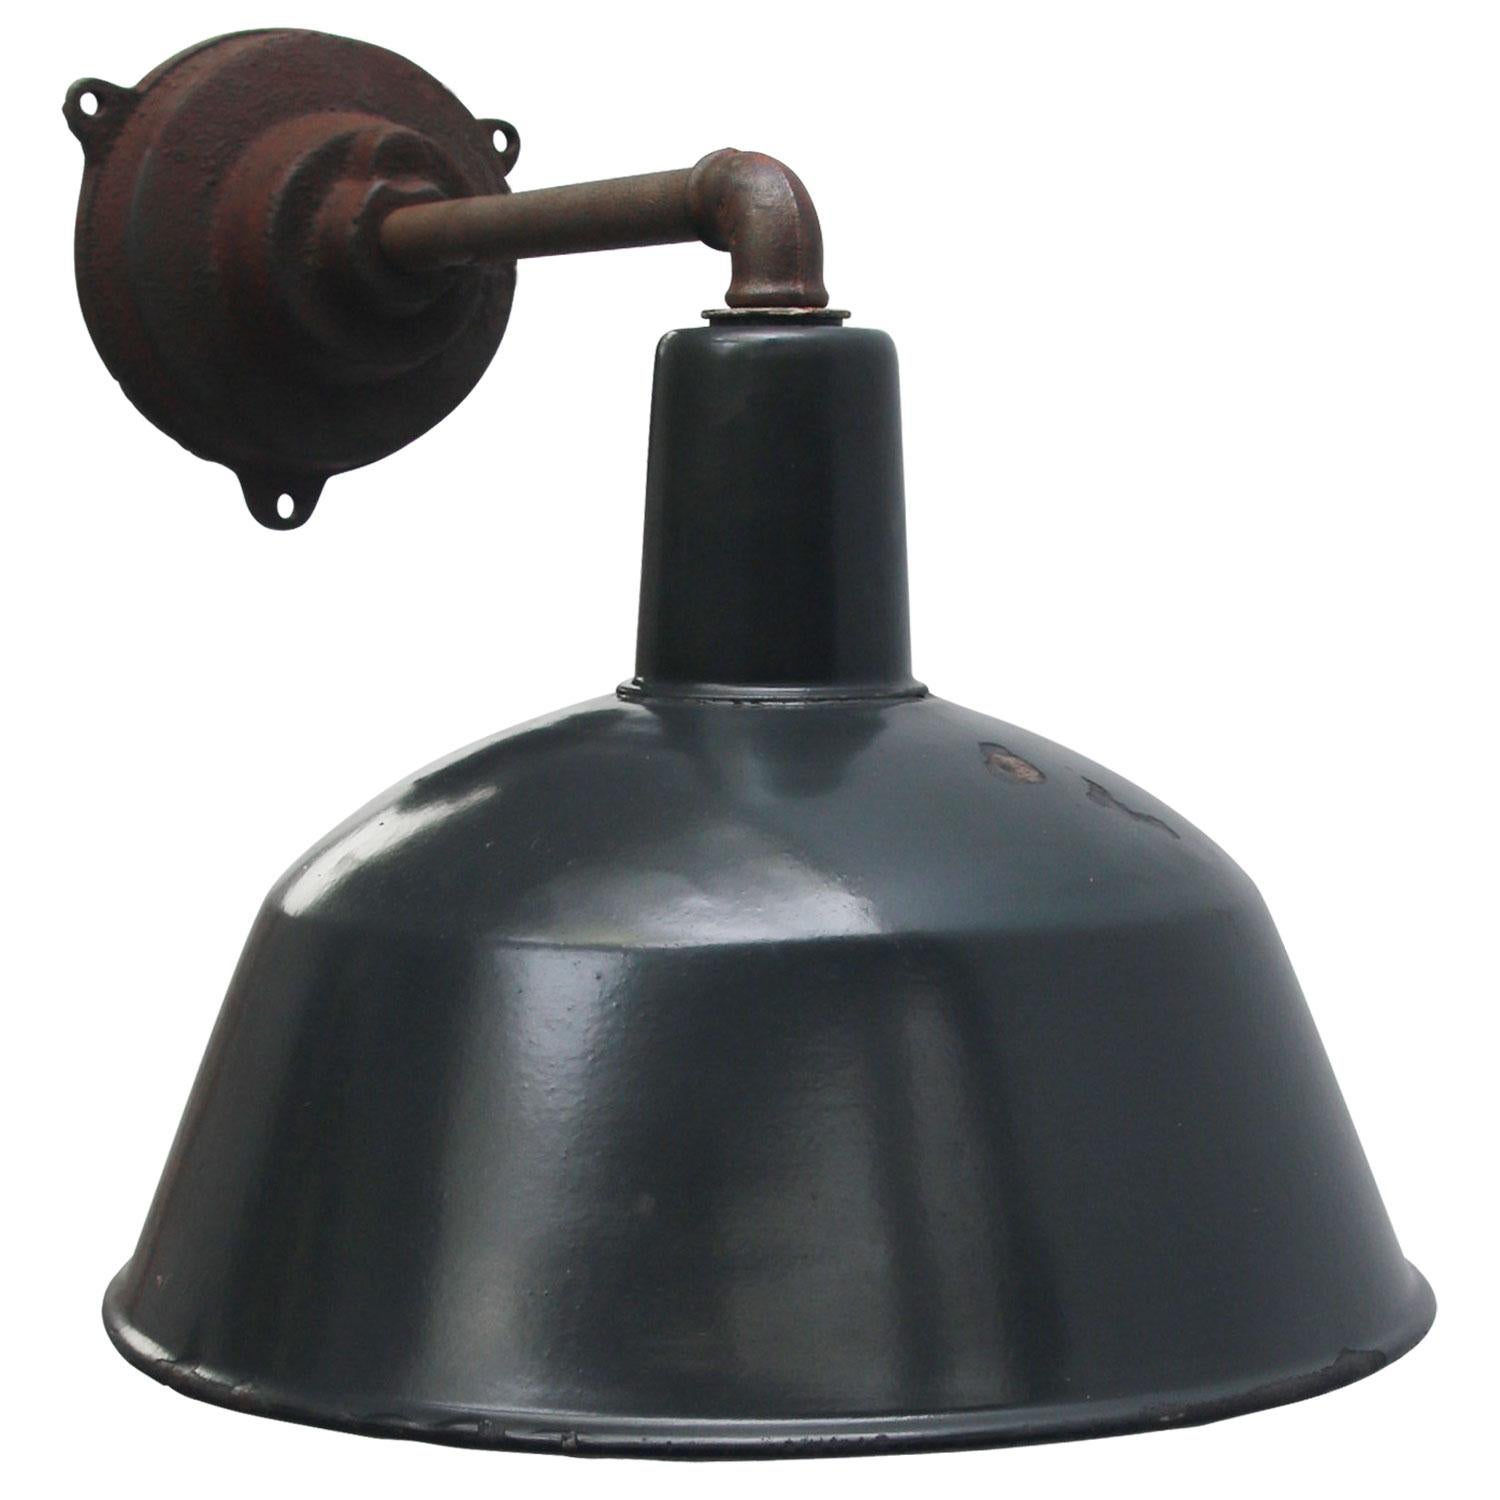 Factory wall light. Blue enamel. White interior.
Diameter cast iron wall piece: 12 cm, three holes to secure. 

Weight: 3.10 kg / 6.8 lb

Priced per individual item. All lamps have been made suitable by international standards for incandescent